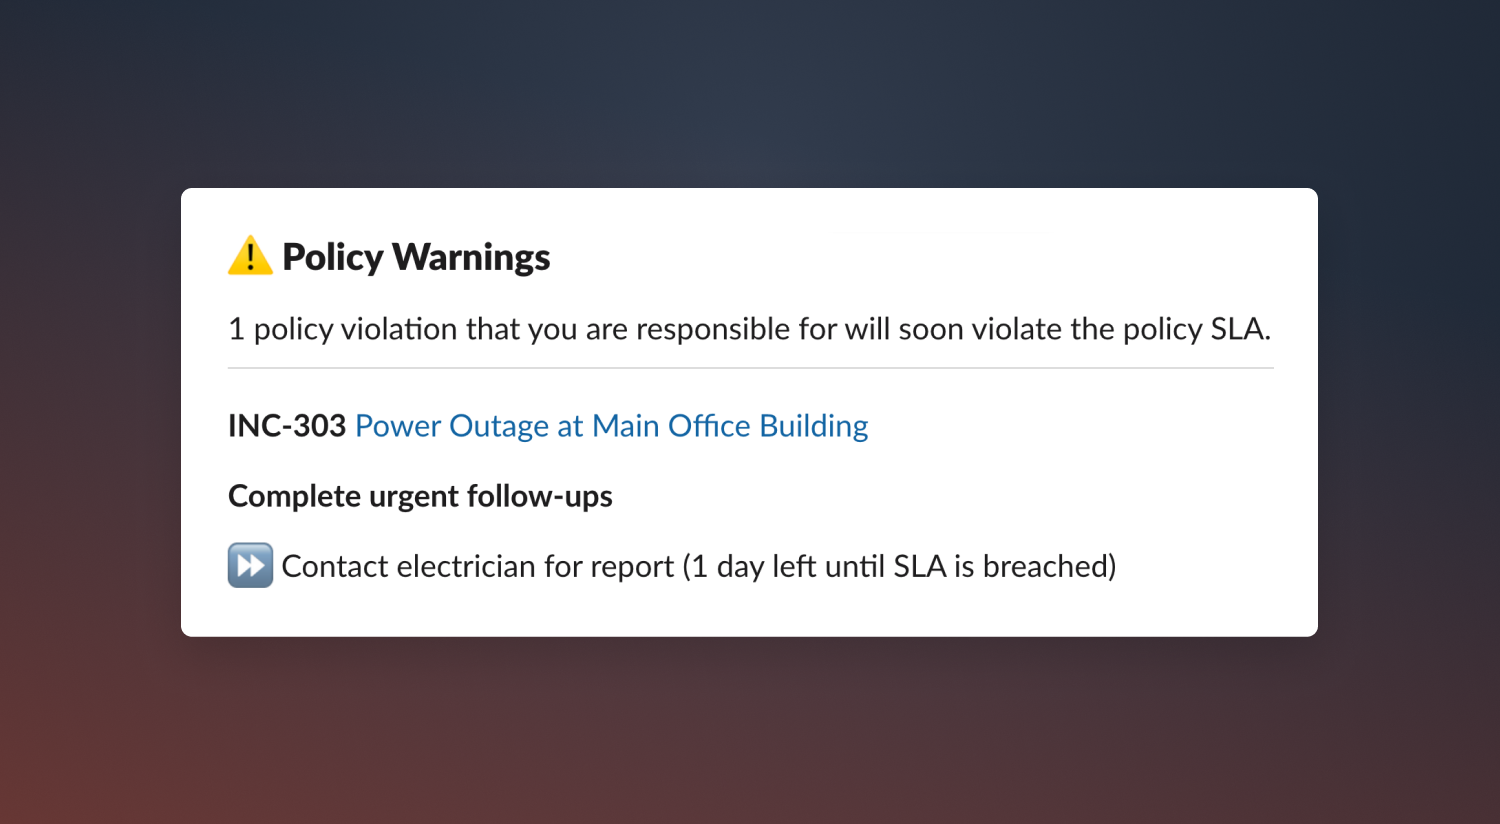 An image showing a user being warned about a policy at risk